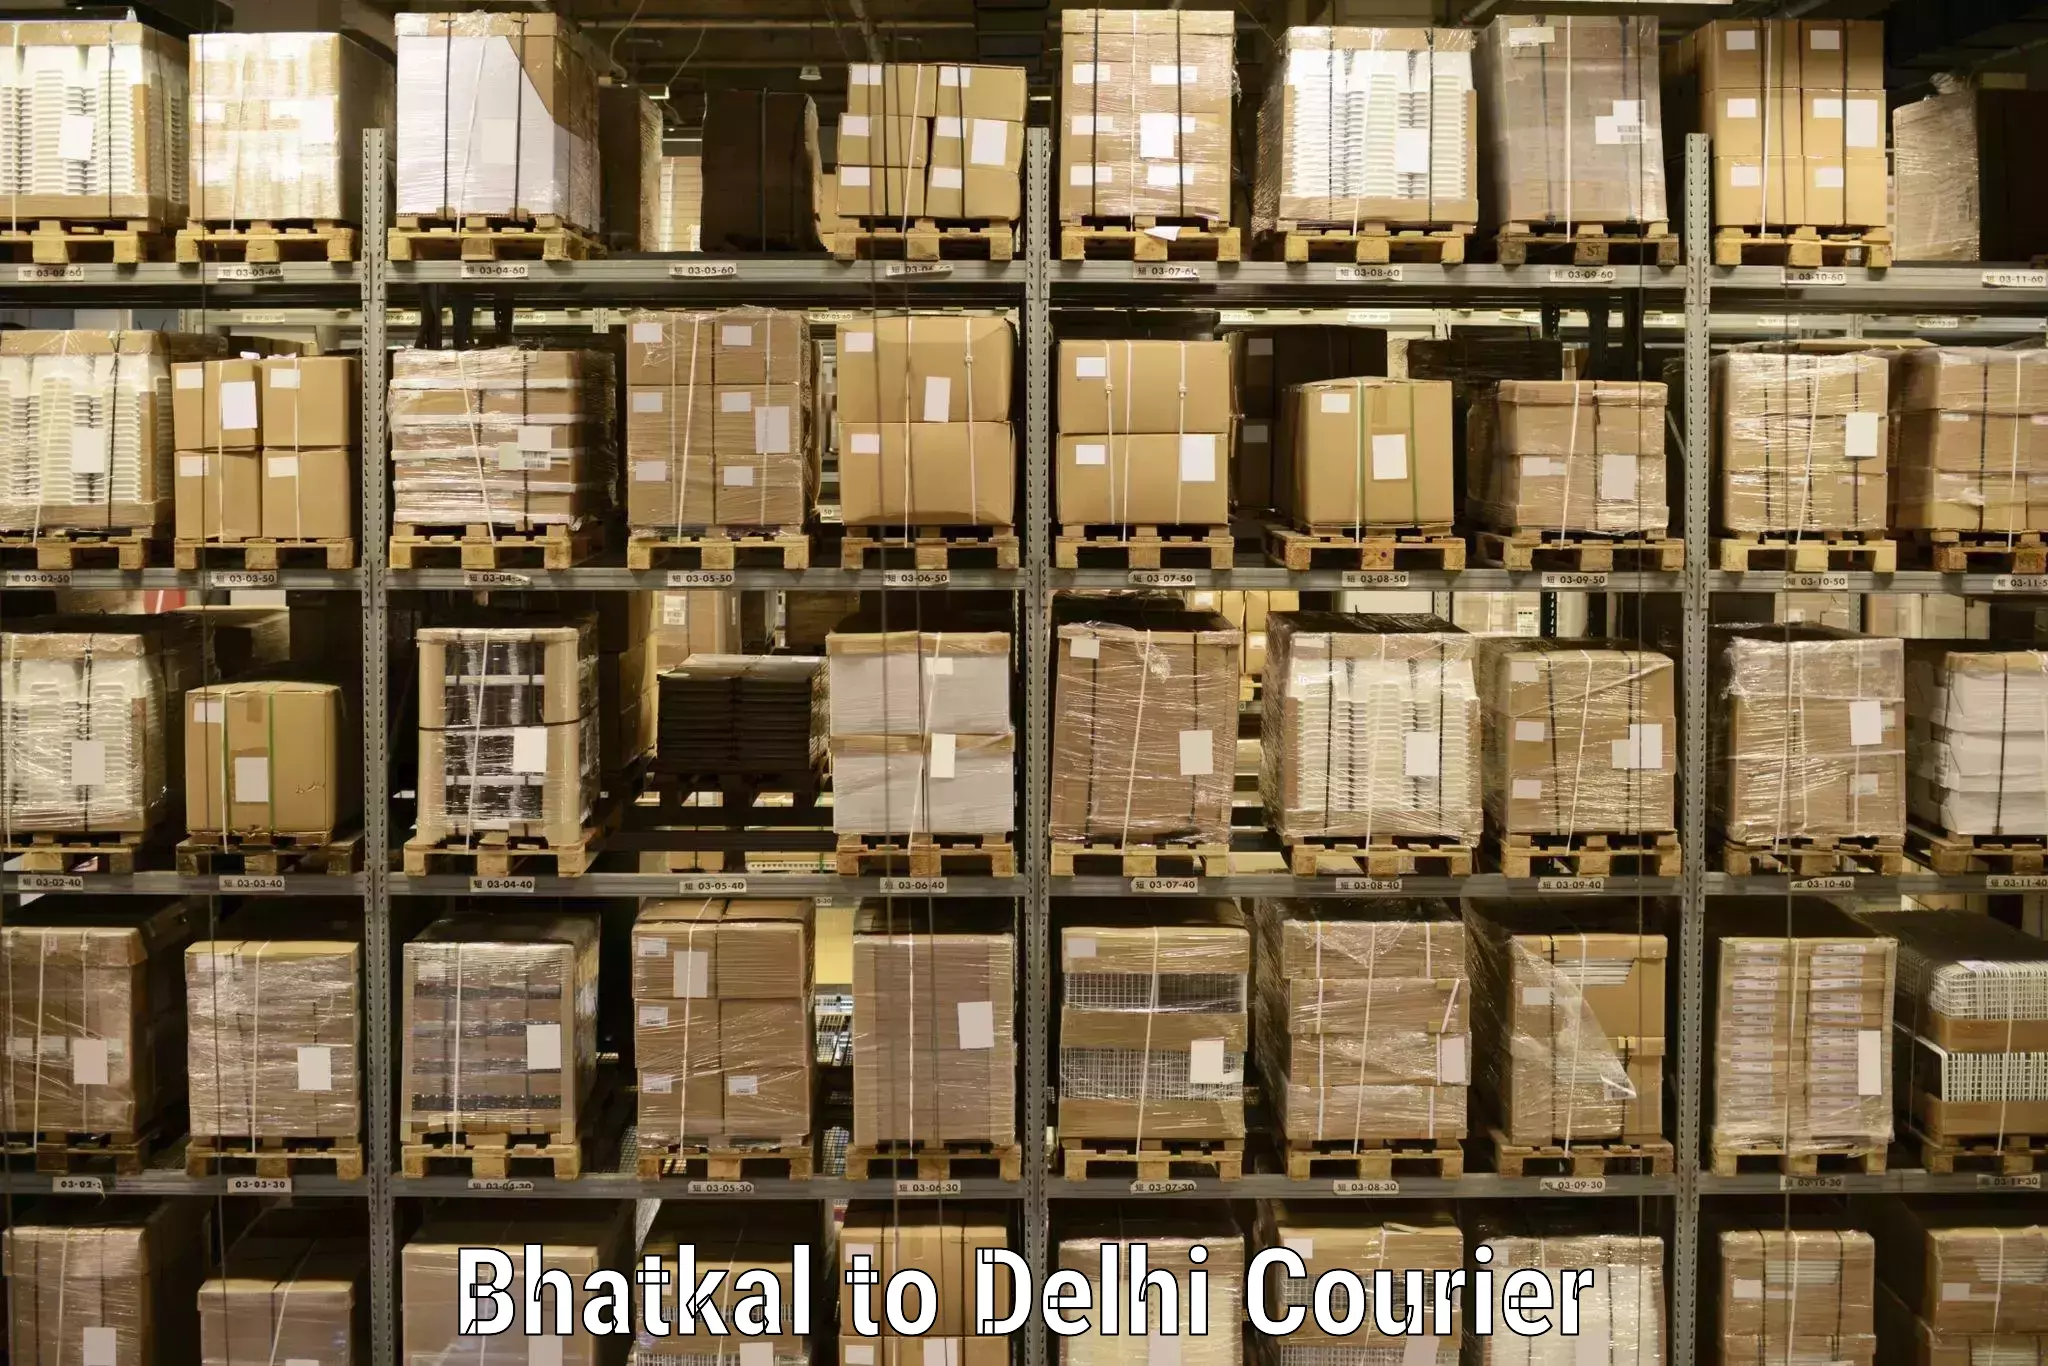 Express delivery capabilities Bhatkal to IIT Delhi